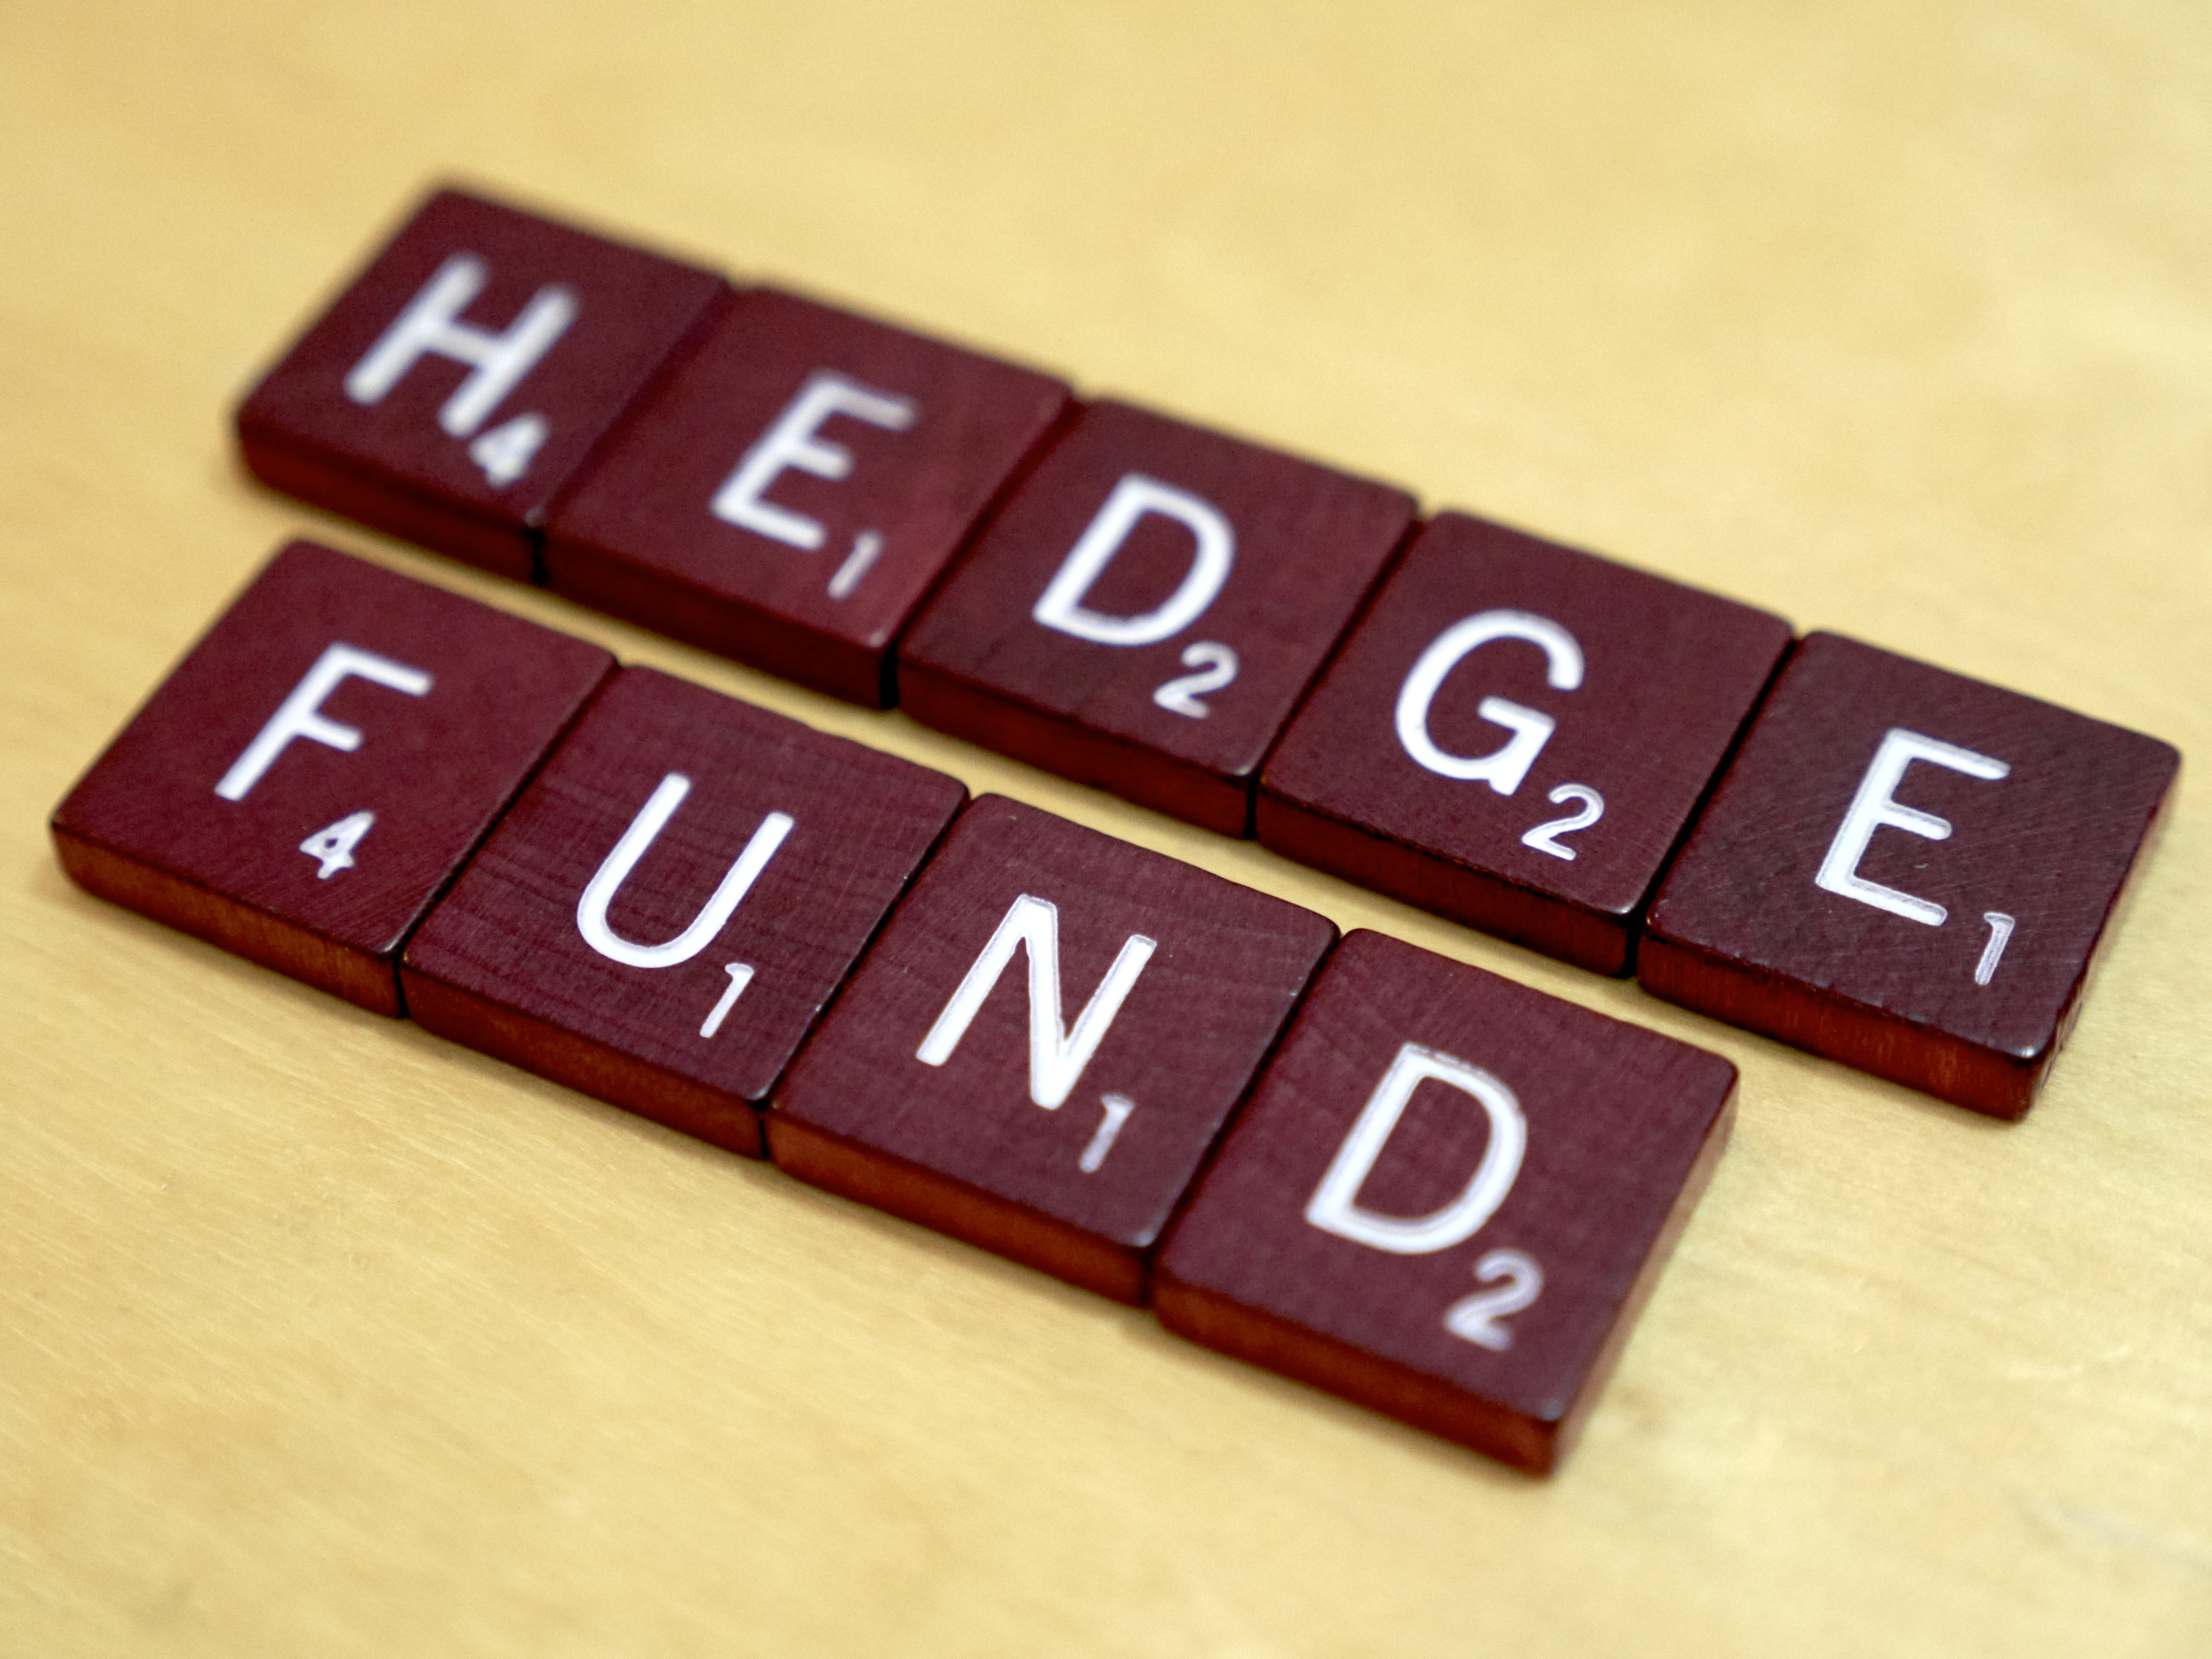 How many hedge funds are there?